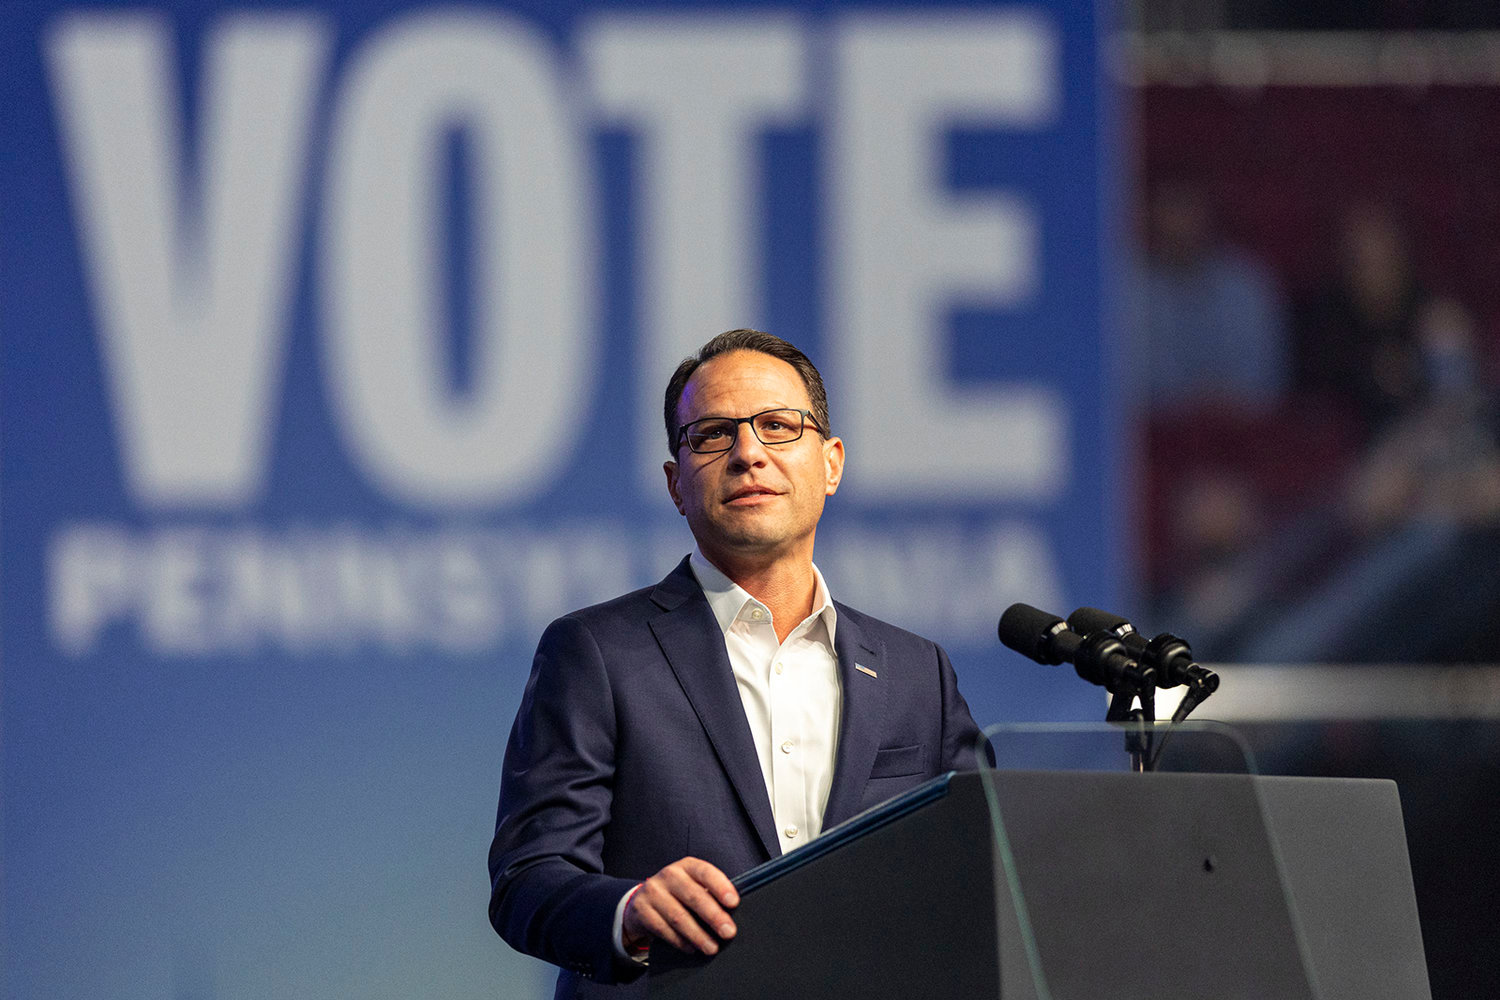 Pennsylvania Attorney General Josh Shapiro, the Democratic nominee for governor, takes the stage to speak at the Liacouras Center in Philadelphia Saturday. (Tyger Williams/The Philadelphia Inquirer/TNS)